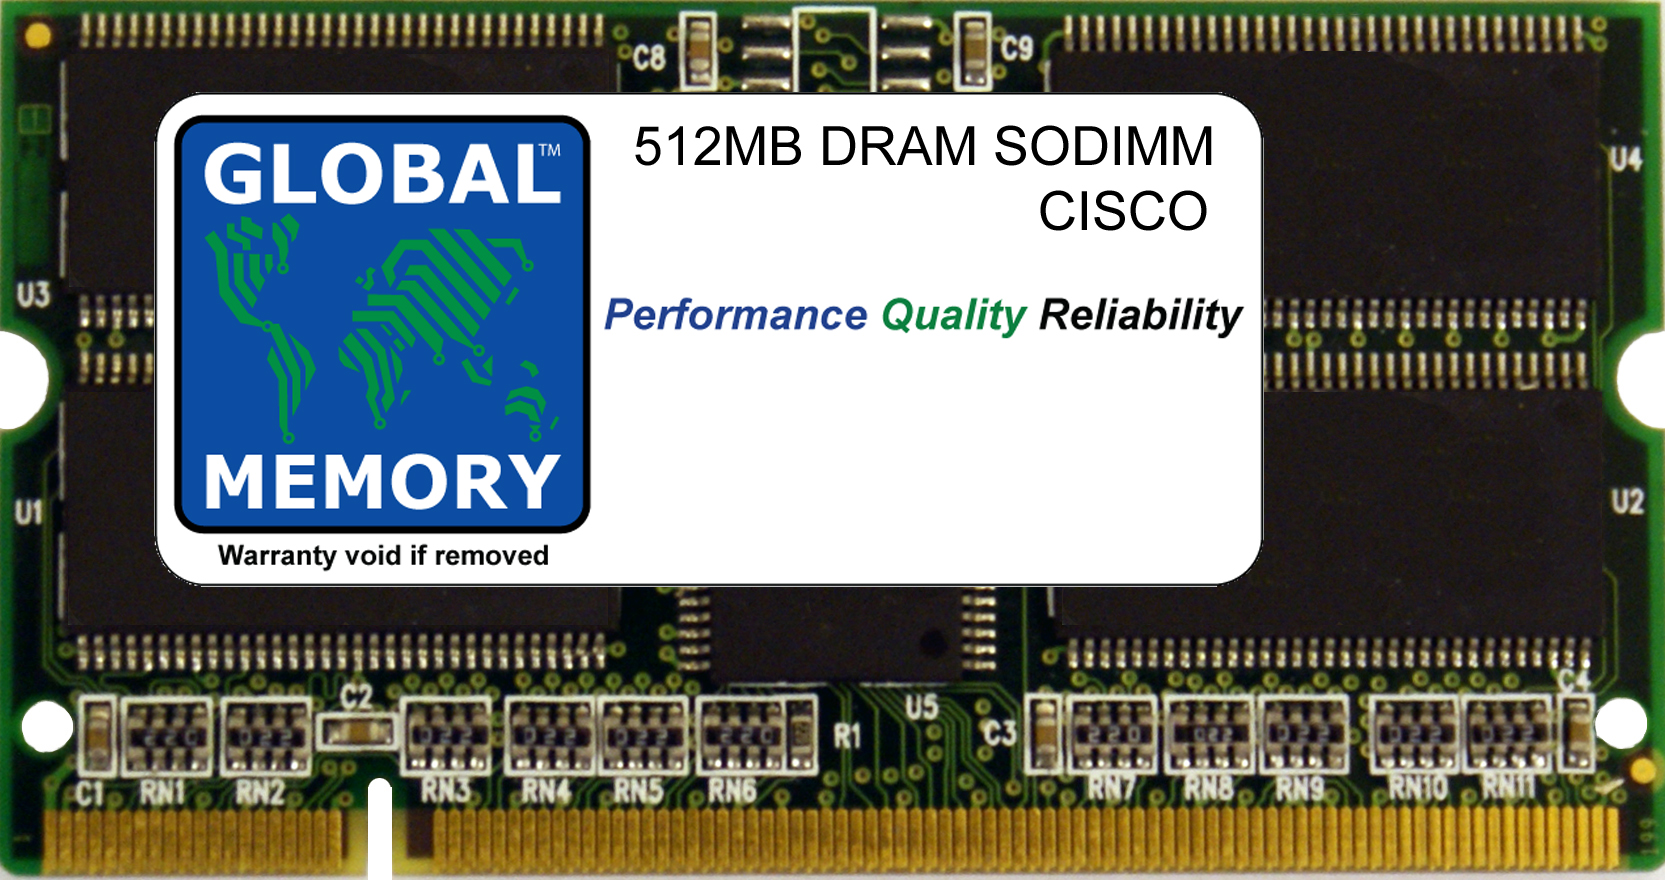 512MB DRAM SODIMM MEMORY RAM FOR CISCO 7600 SERIES ROUTERS SUPERVISOR ENGINE & ROUTE SWITCH PROCESSOR (MEM-SIP-200-512M) - Click Image to Close